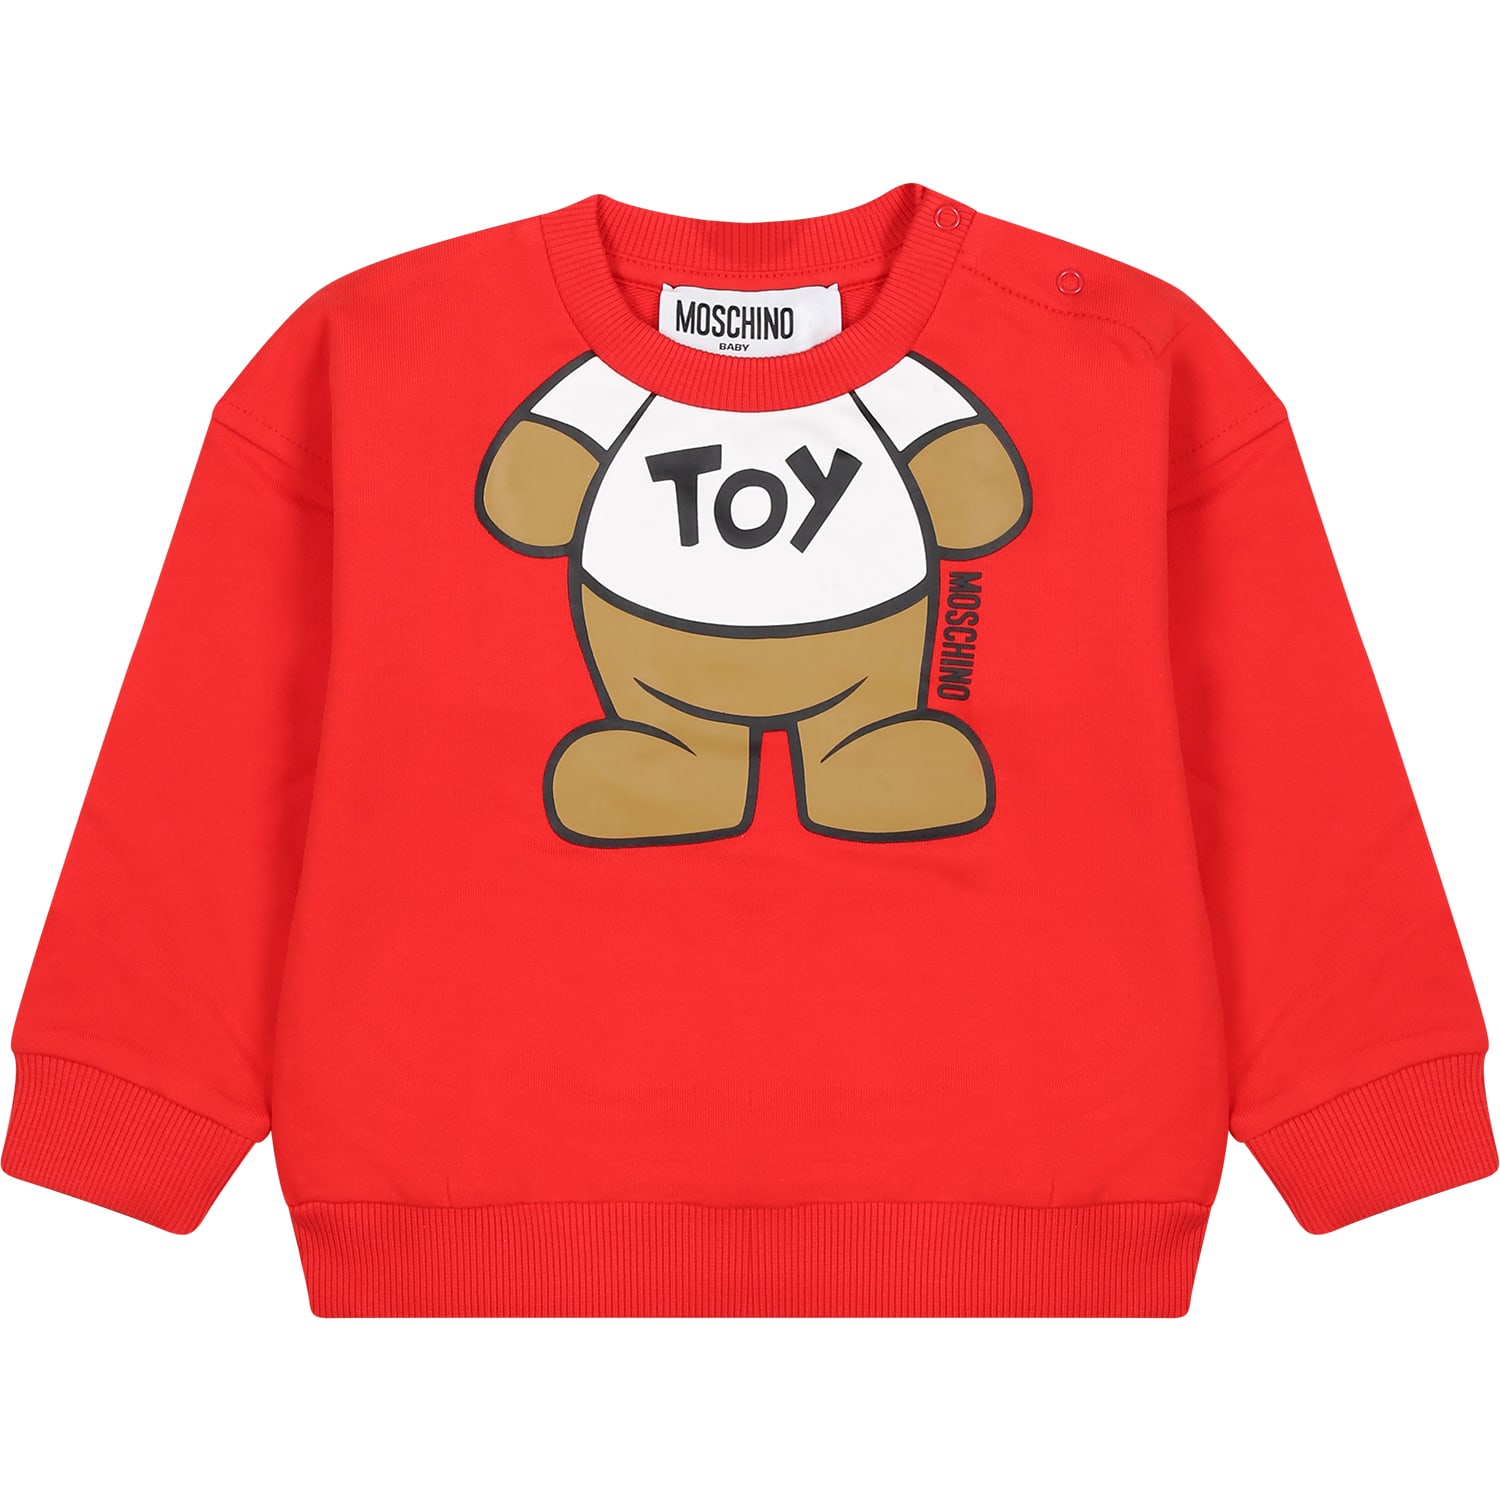 Moschino Kids' Red Sweatshirt For Babies With Teddy Bear